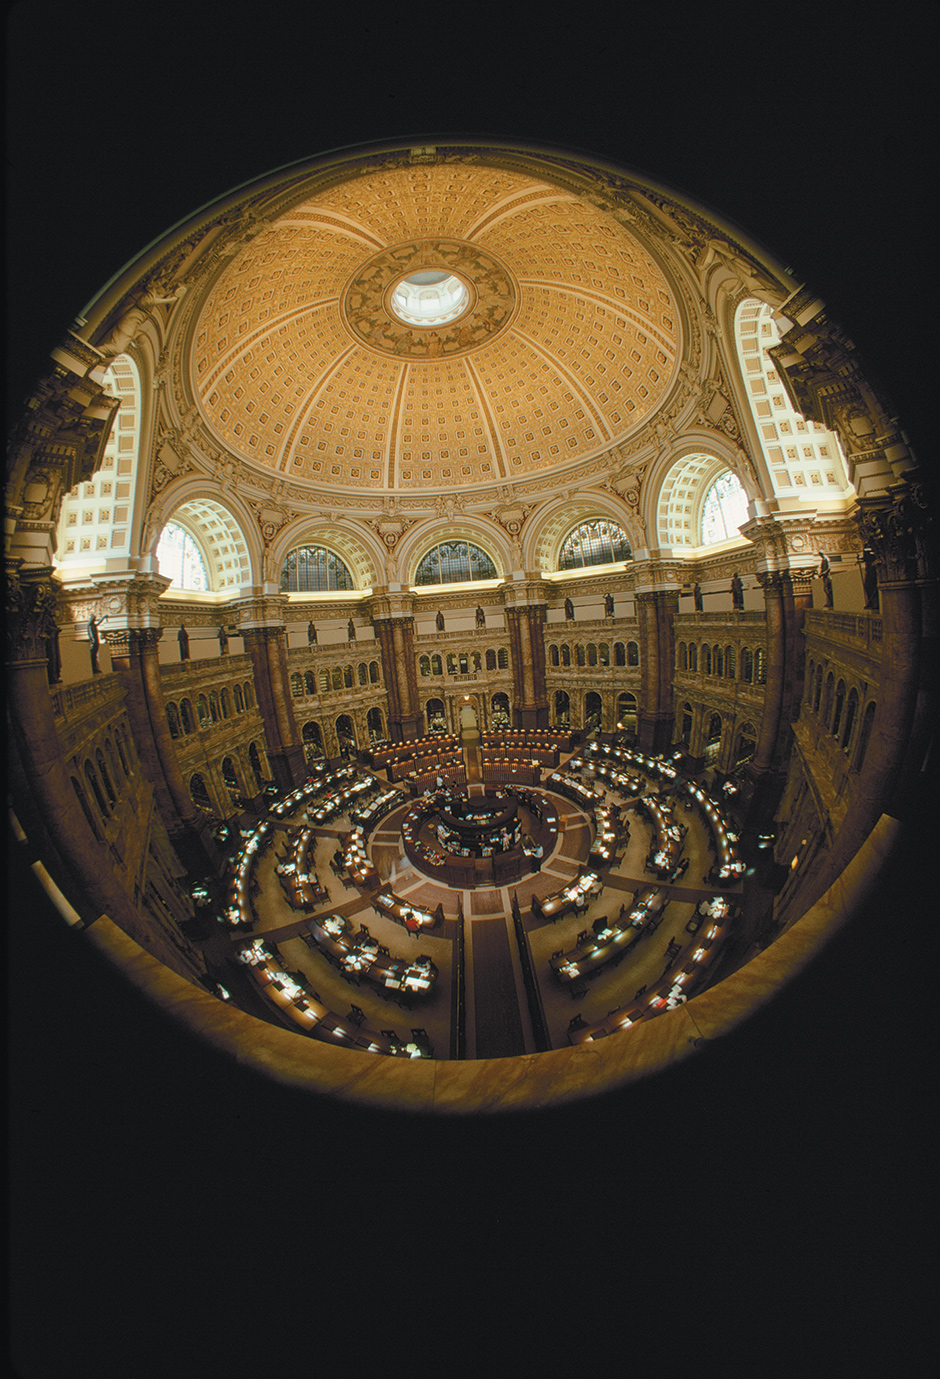 The reading room at the Library of Congress, Washington, D.C.